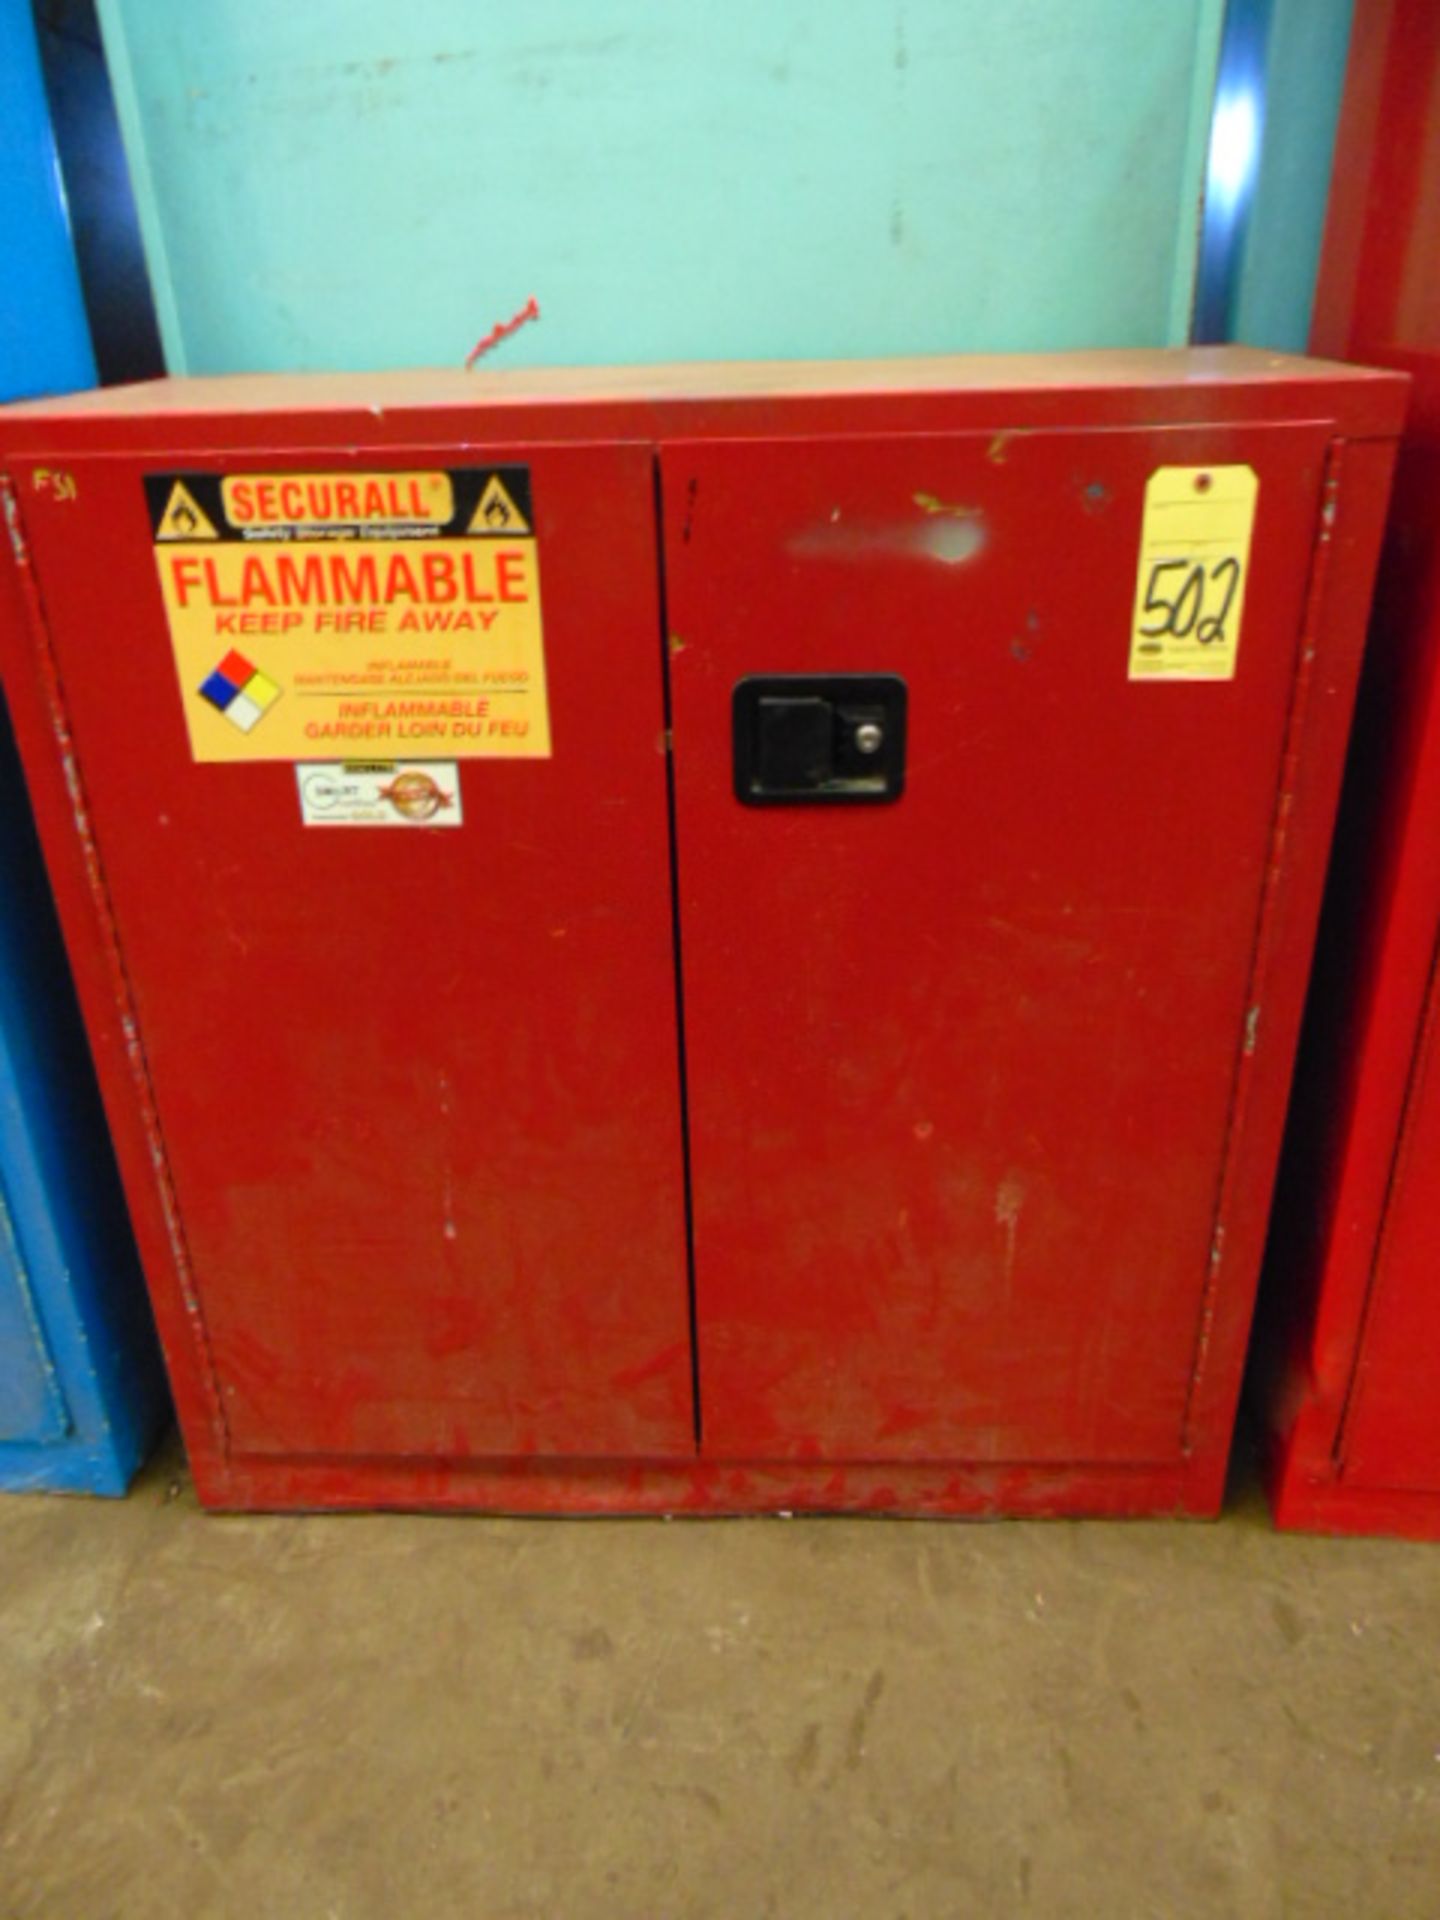 FLAMMABLE STORAGE CABINET, SECURALL